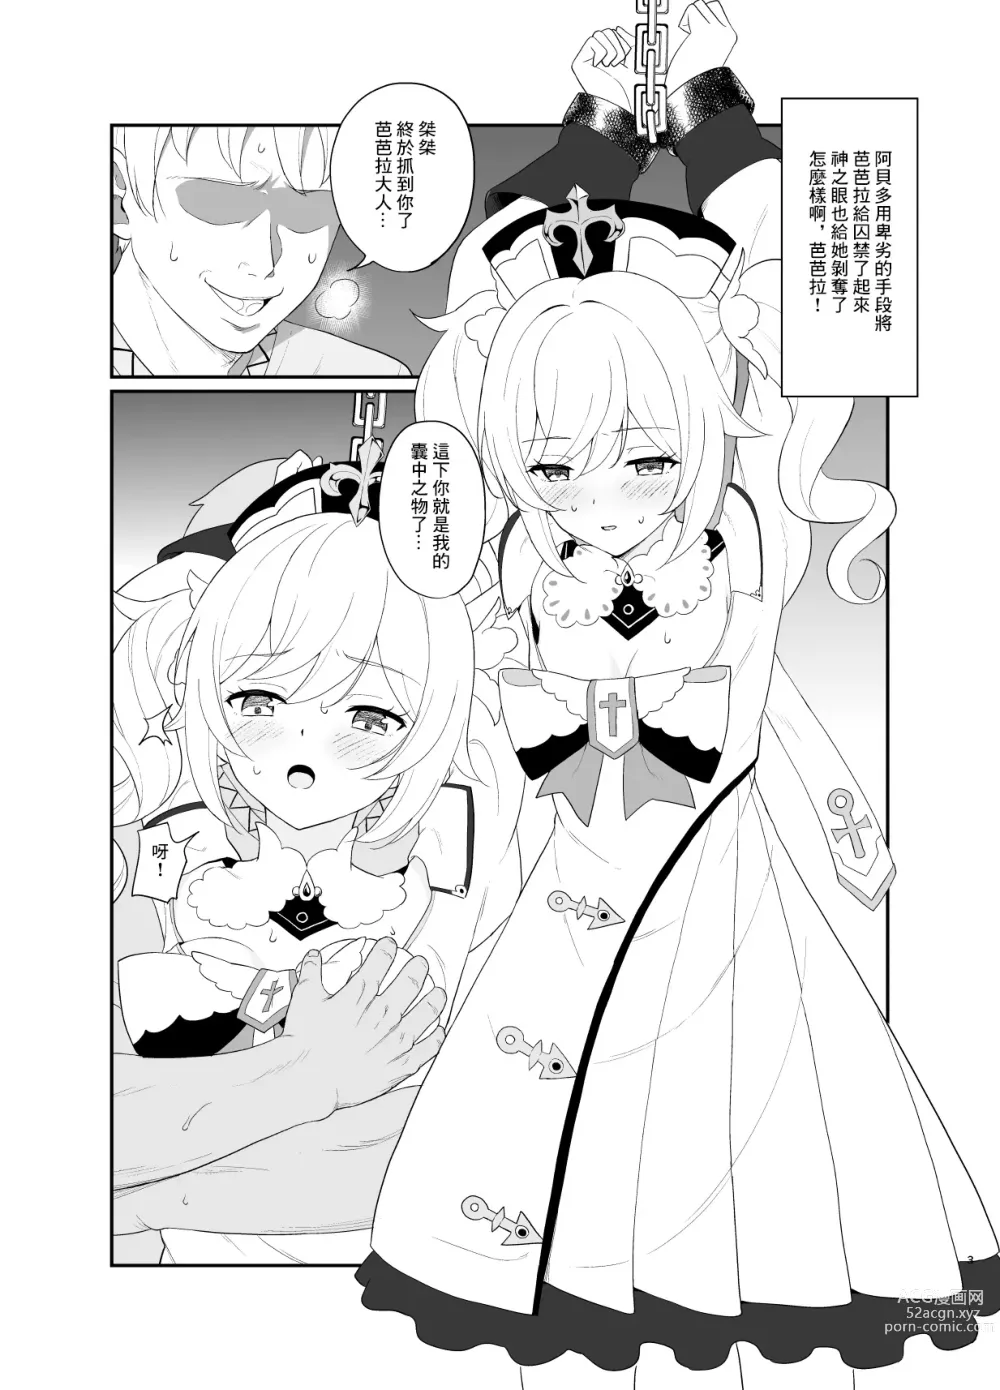 Page 2 of doujinshi 我的芭芭拉大人